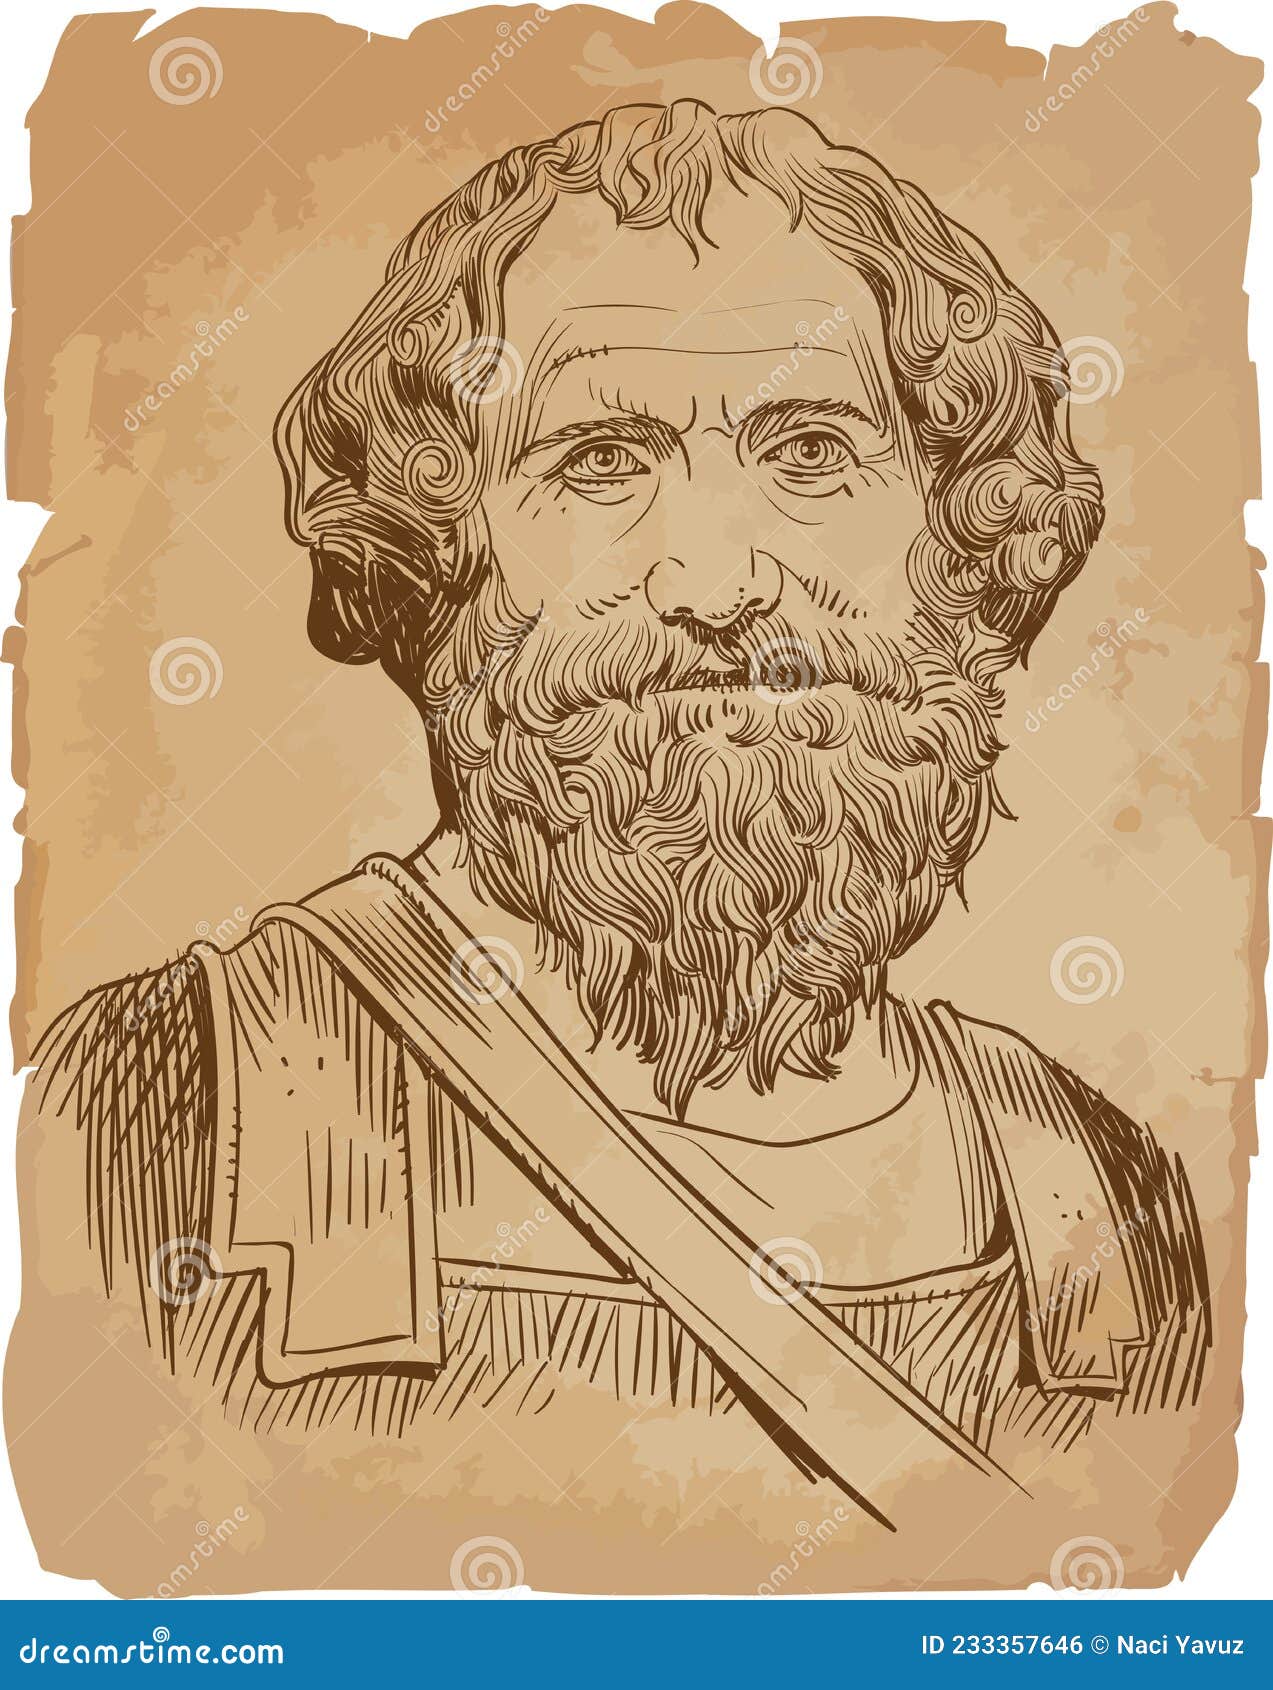 Archimedes greek mathematician and inventor Stock Photos and Images   agefotostock